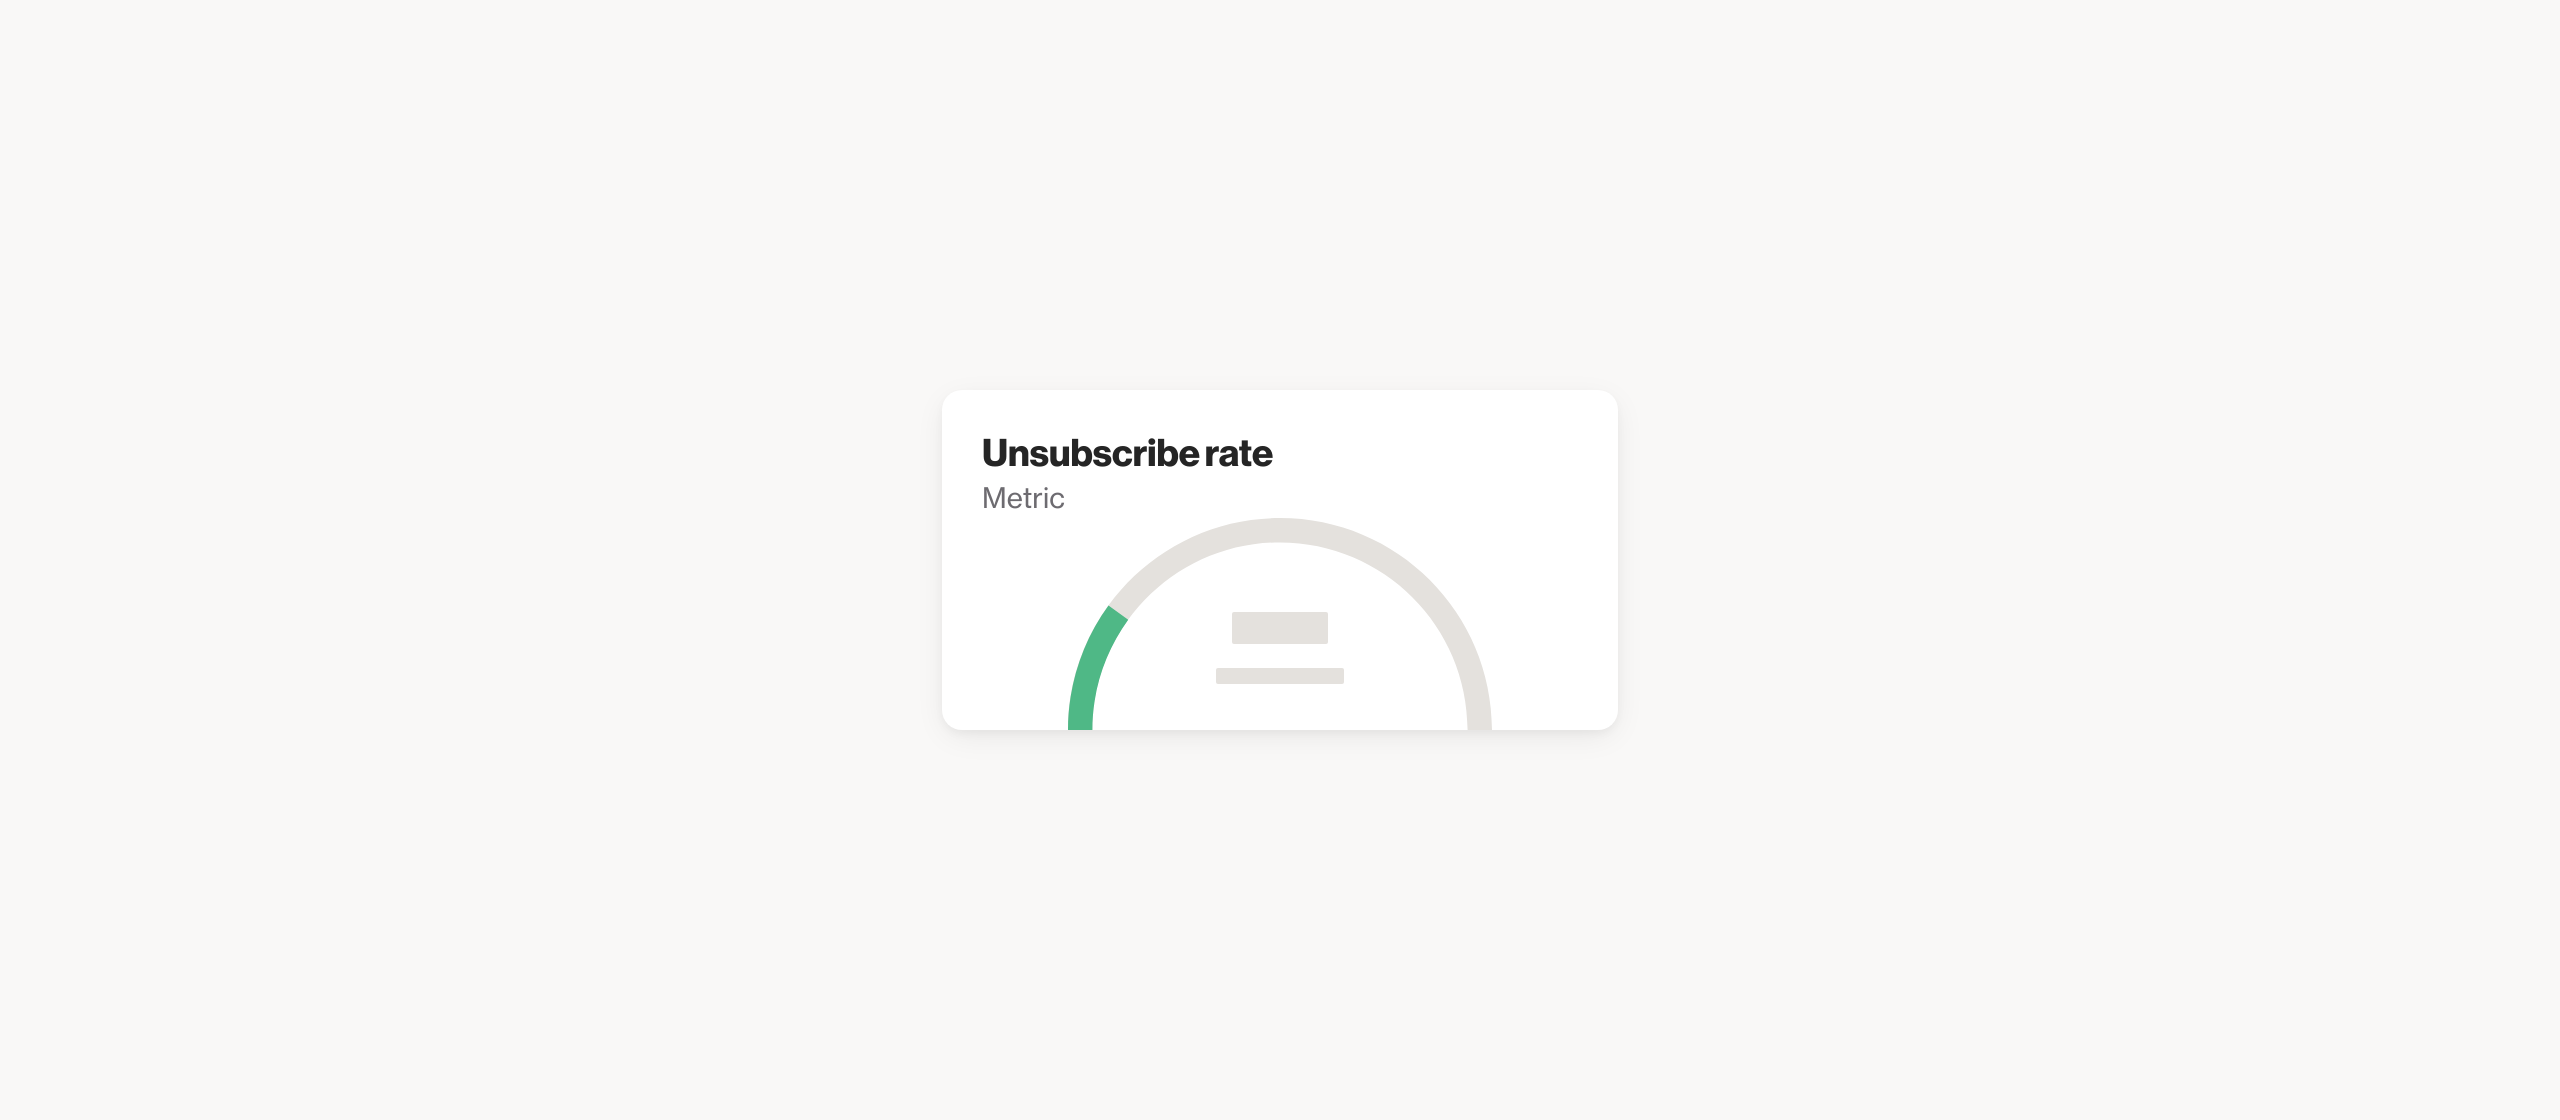 Global unsubscribe rate